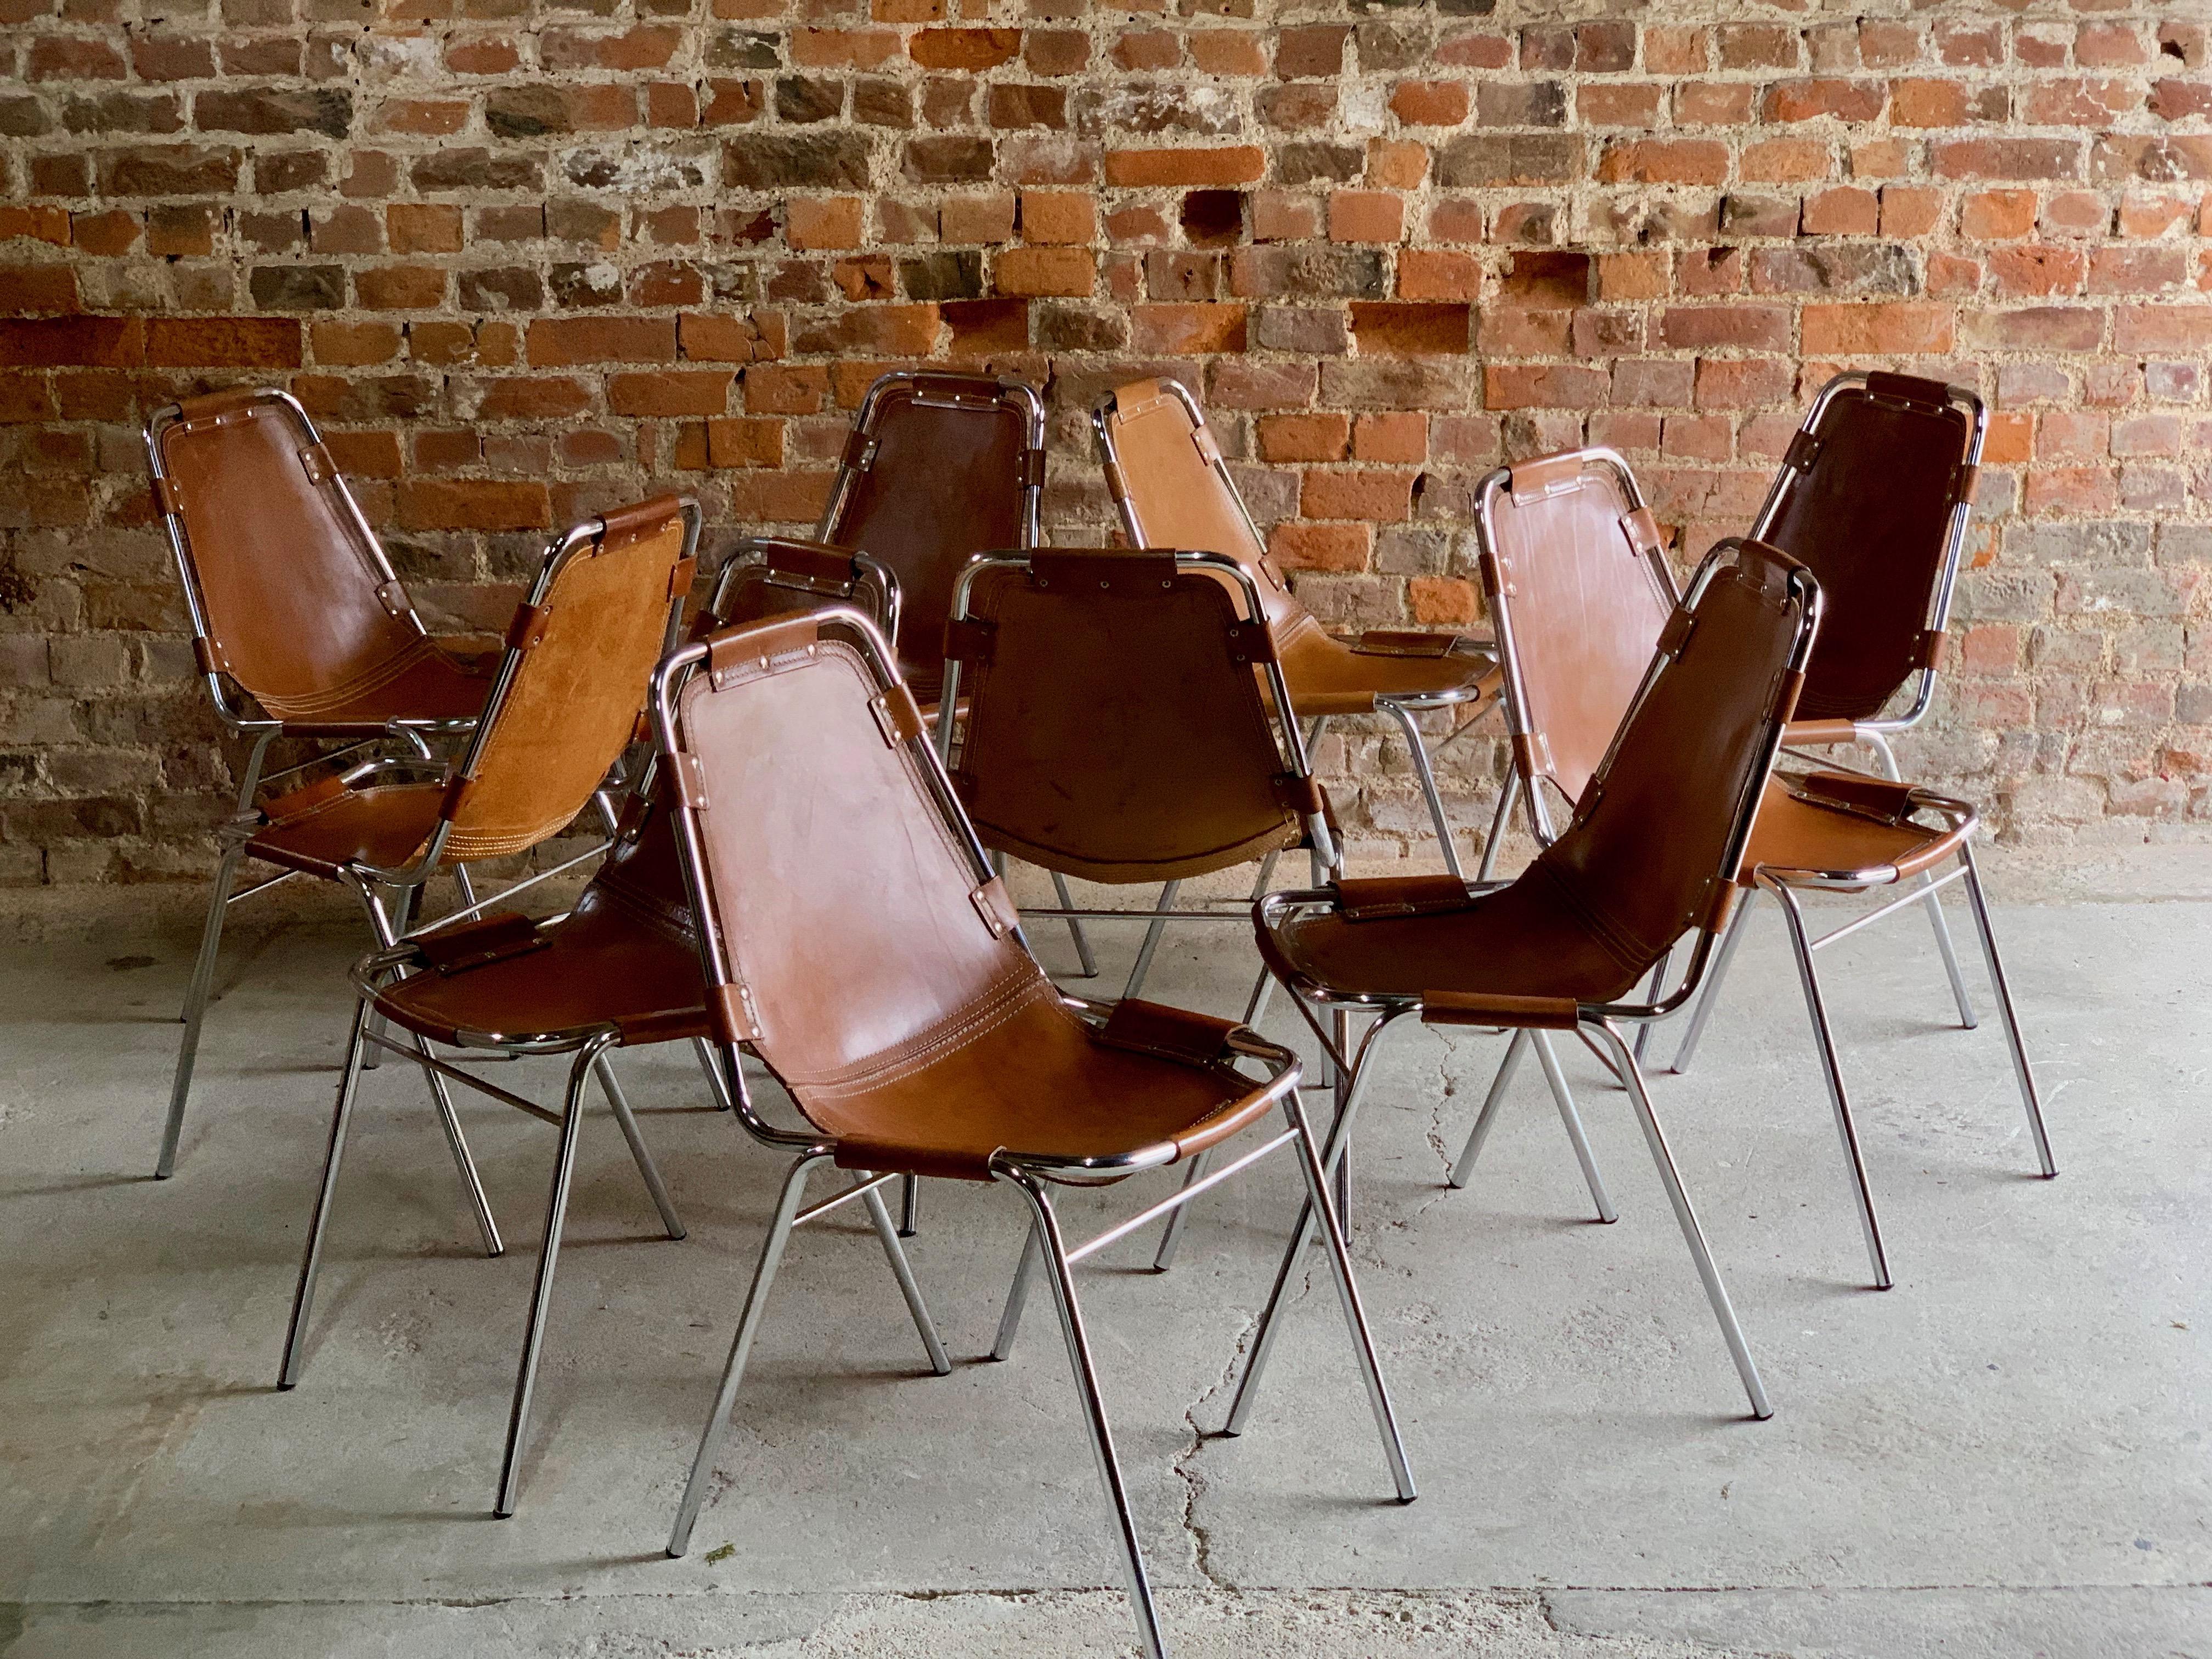 Original set of ten tan leather 'Les Arcs' dining chairs manufactured by the Italian firm, Dal Vera, and selected by Charlotte Perriand for the Les Arcs ski resort, each chair consists of a chrome tubular frame with brown leather seats, this set